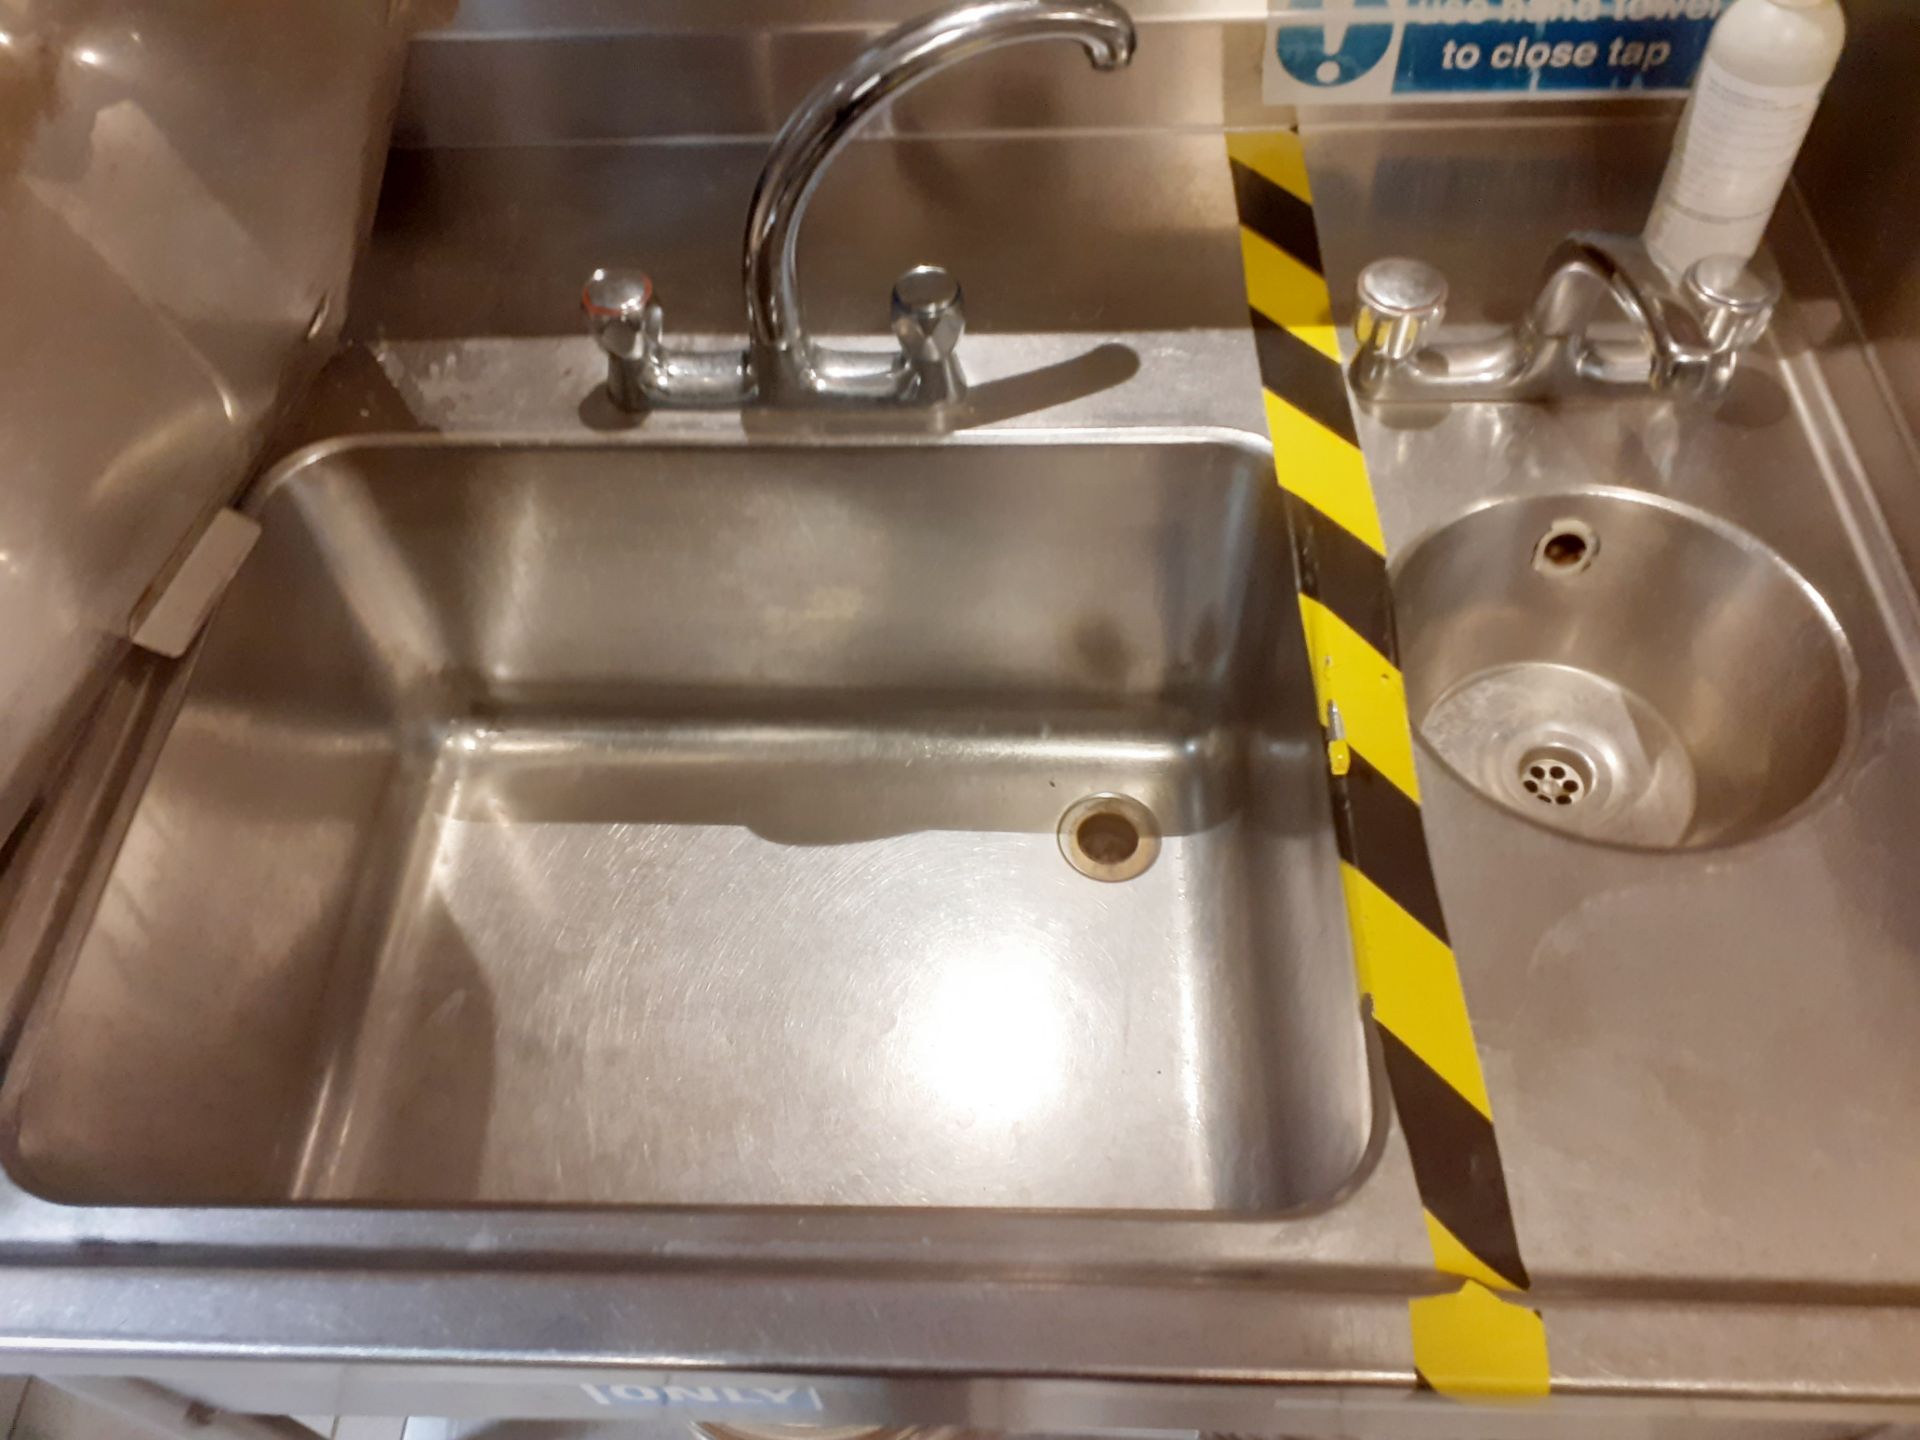 1 x Large Food Prep Sink Wash Unit With Mixer Taps and Hand Wash Basin - CL582 - Location: London - Image 3 of 6